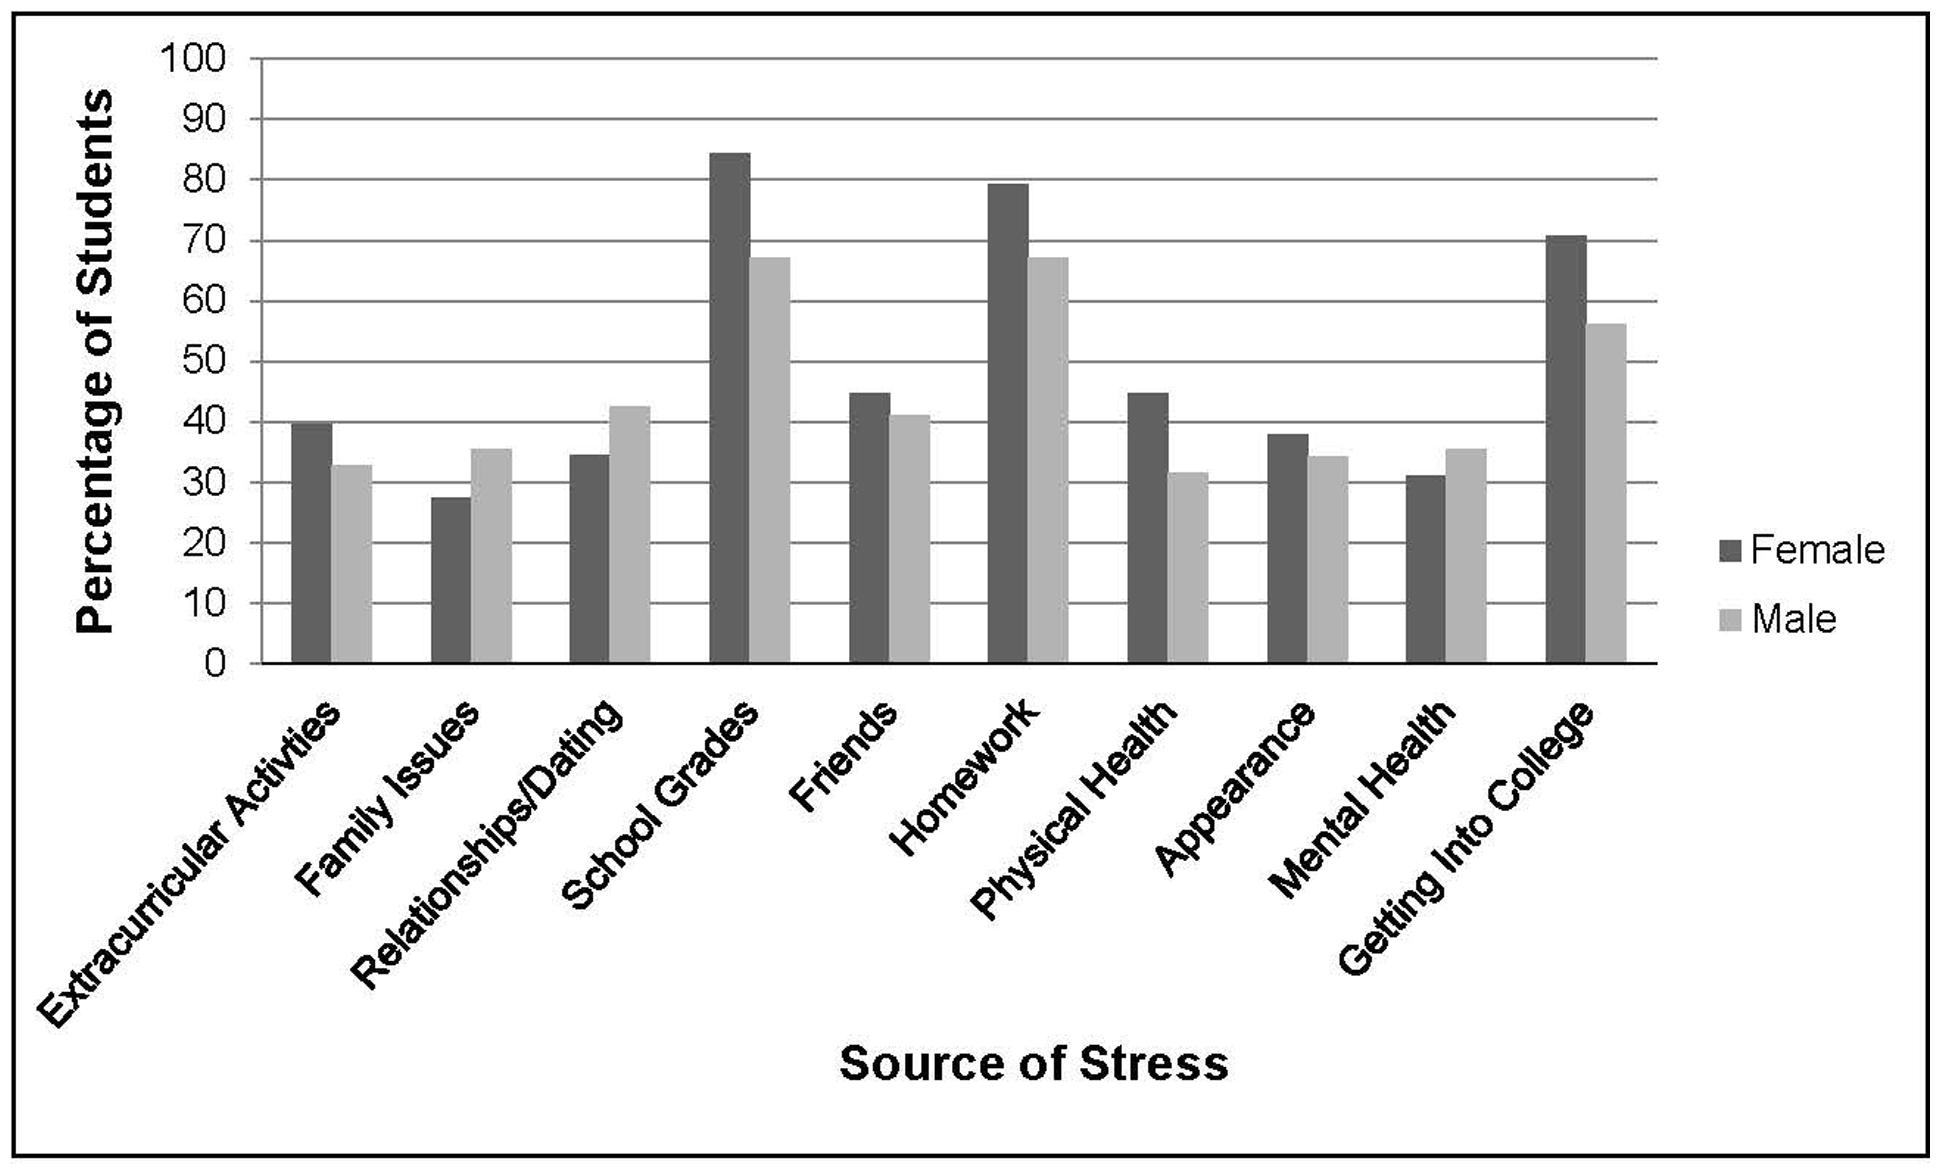 Frontiers | A multi-method exploratory study of stress, coping, and